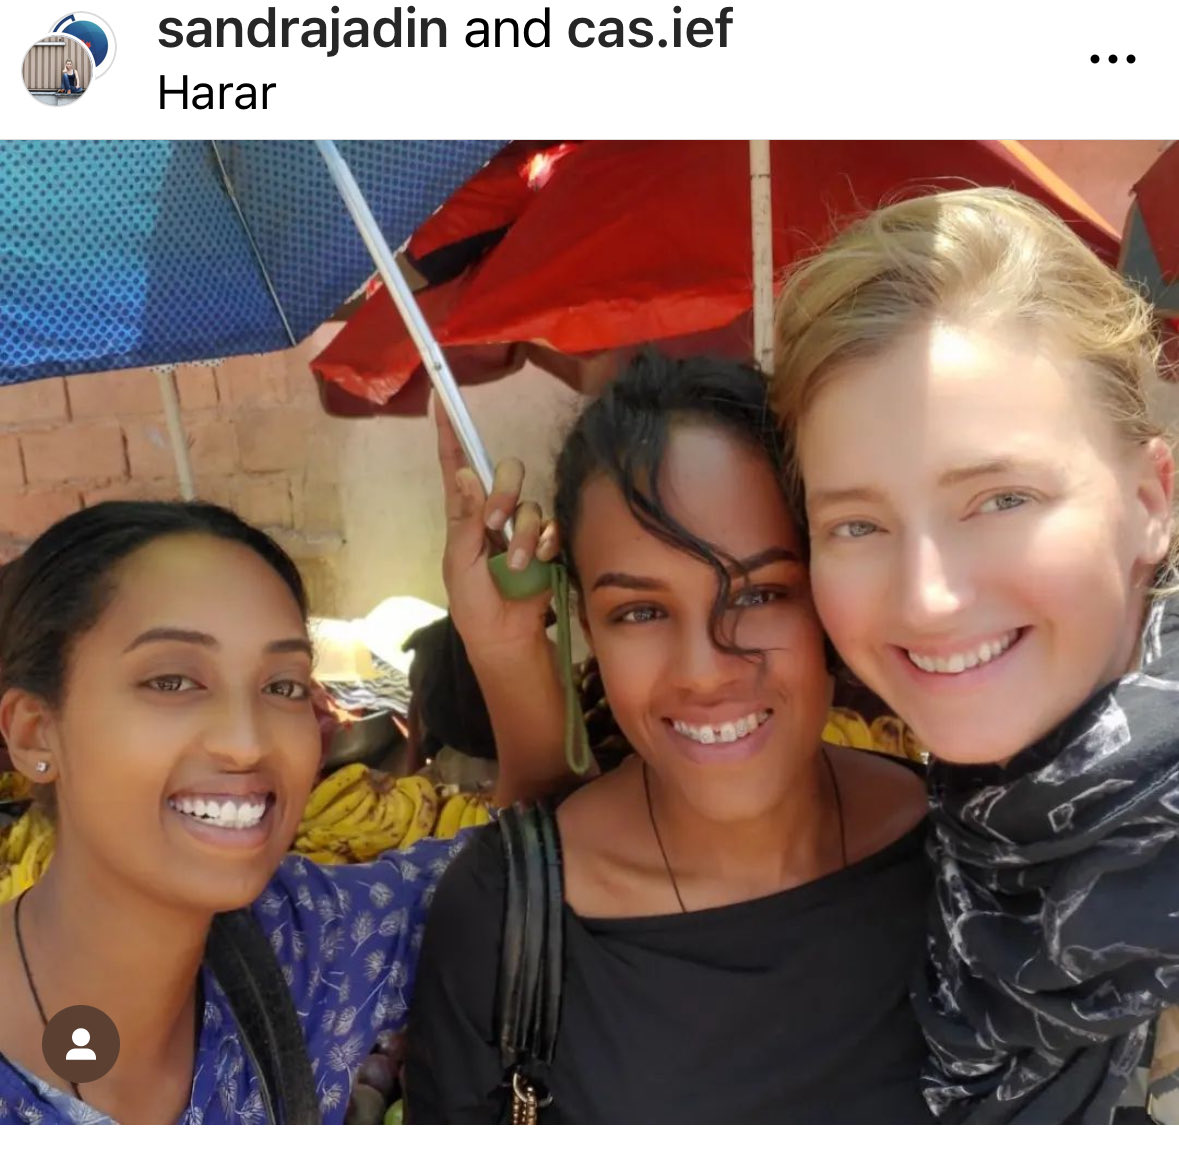 sandrajadin 'Meet the incredible faces of change in the Haramaya Anesthesia Residency Program! & In a field where female representation is historically low, these two remarkable women defy the odds with grace and determination.